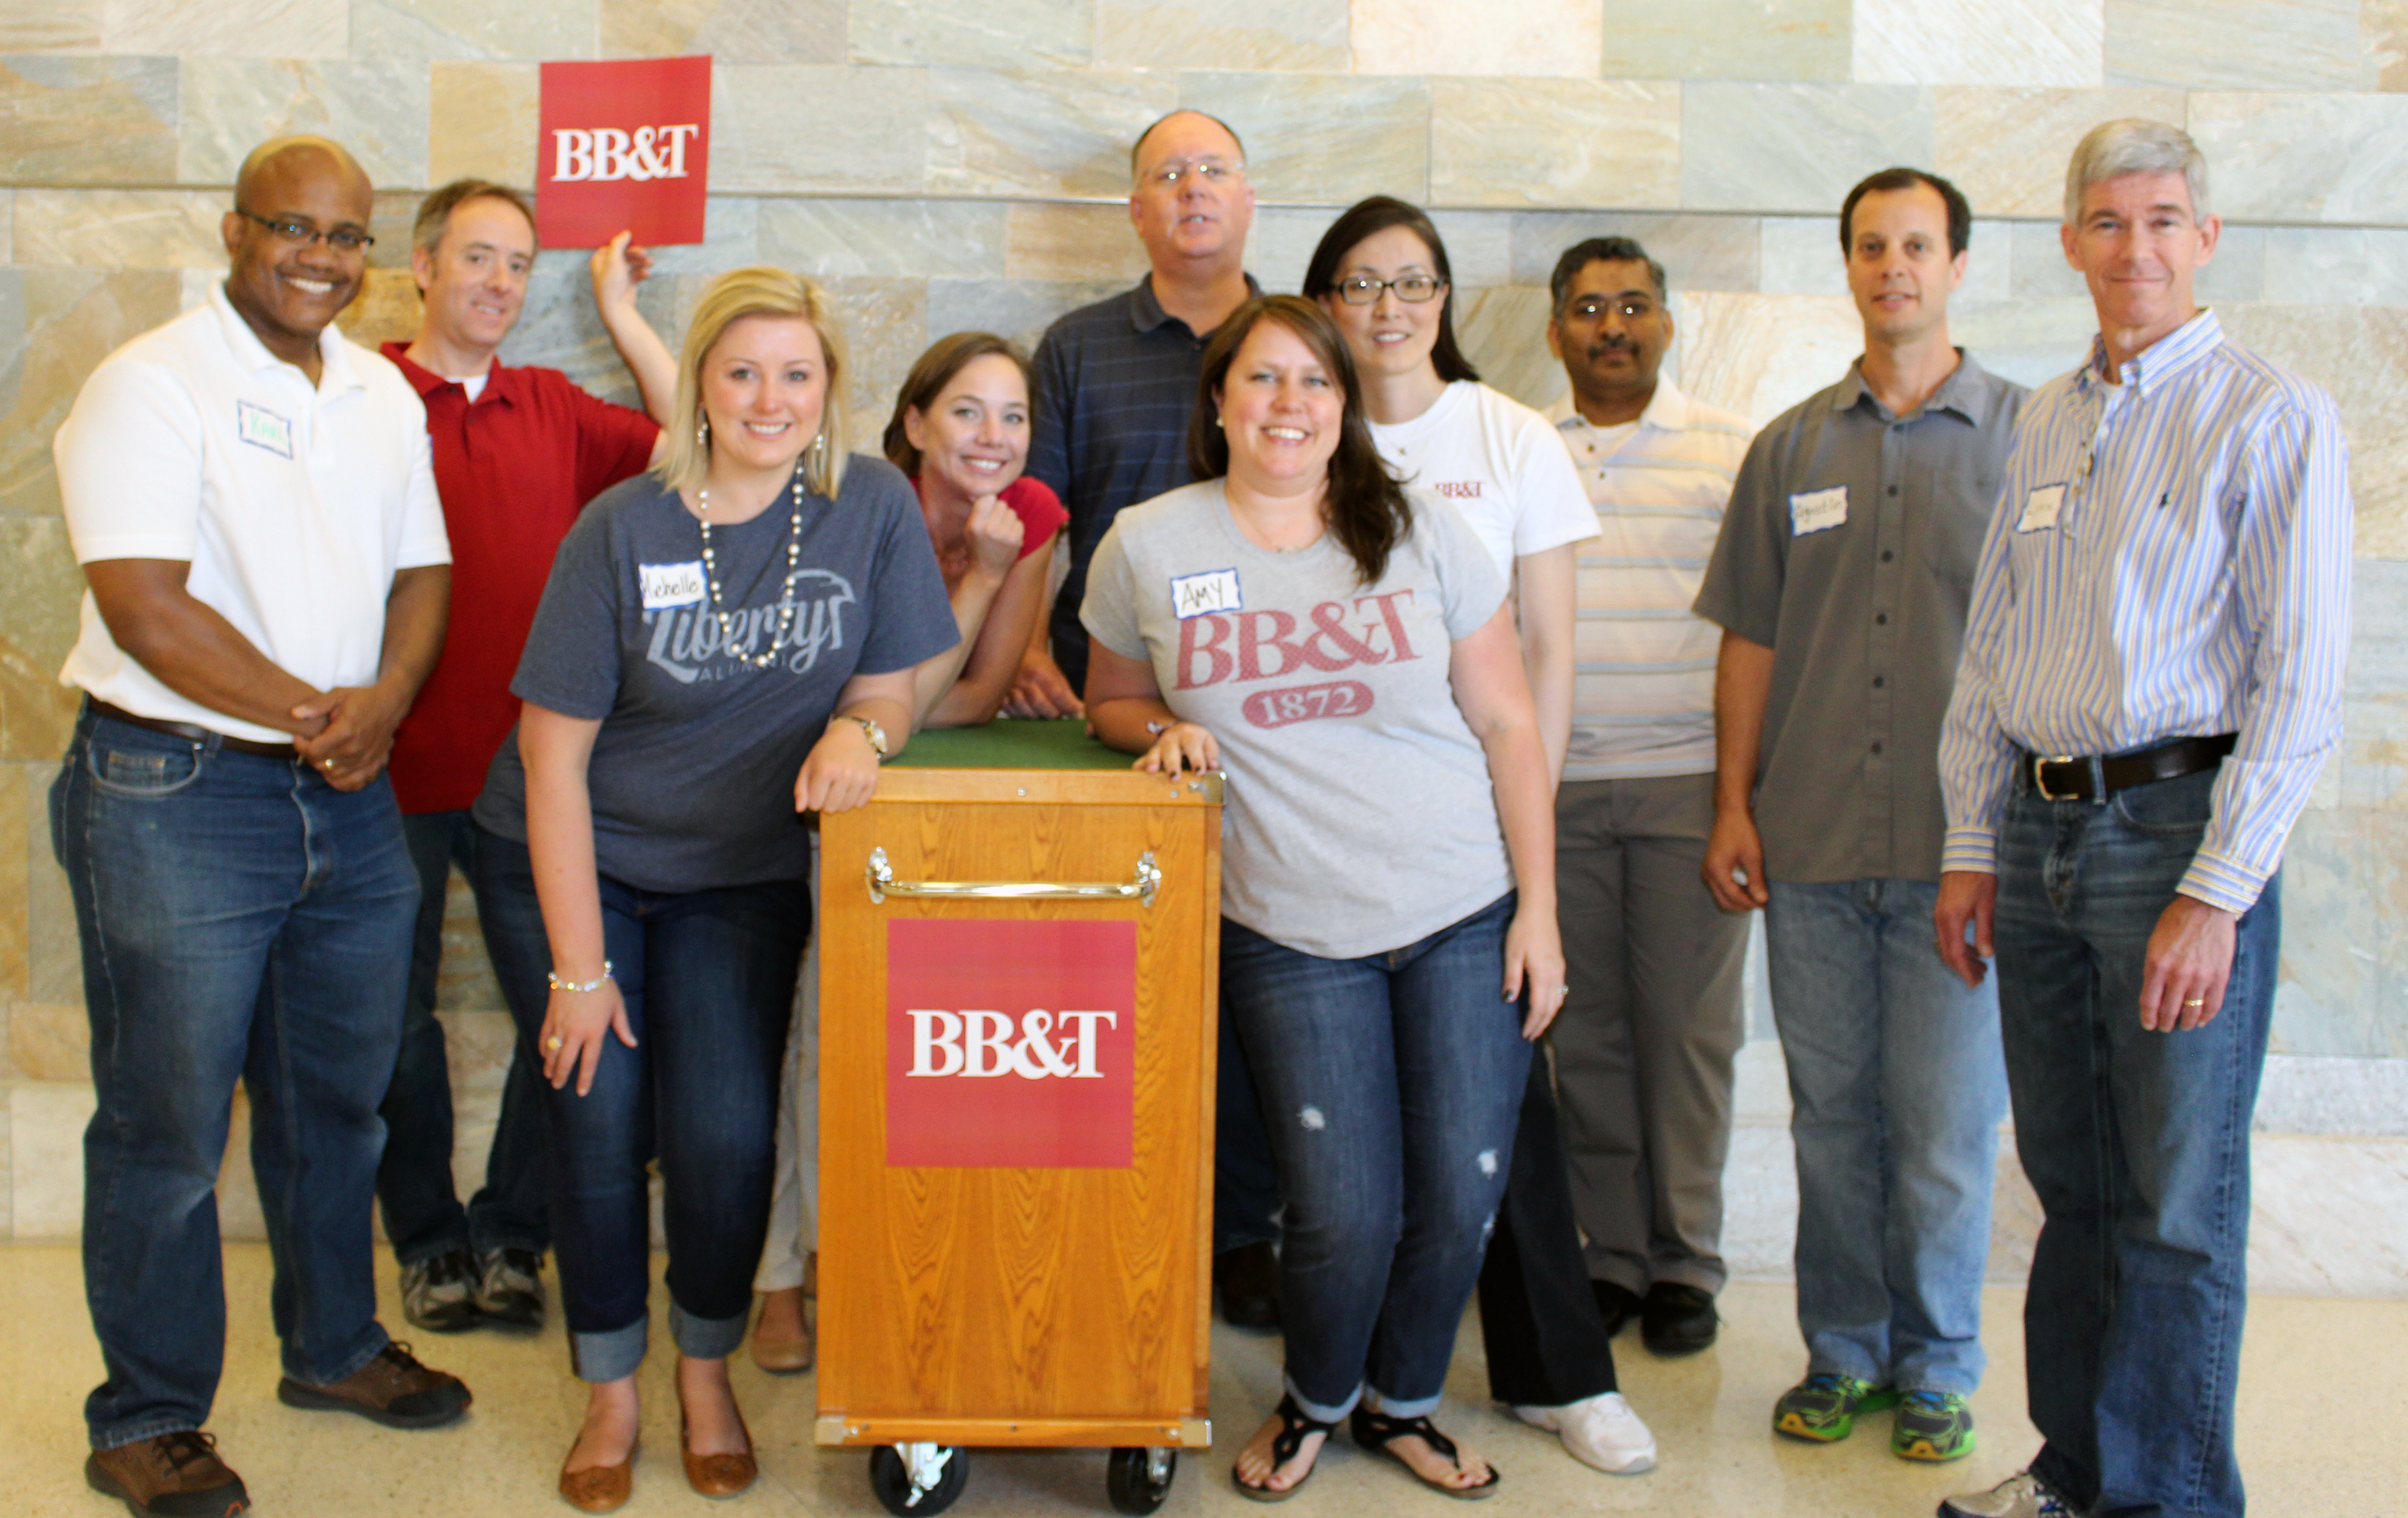 The BB&T volunteers pose with their comfort cart at the N.C. Cancer Hospital